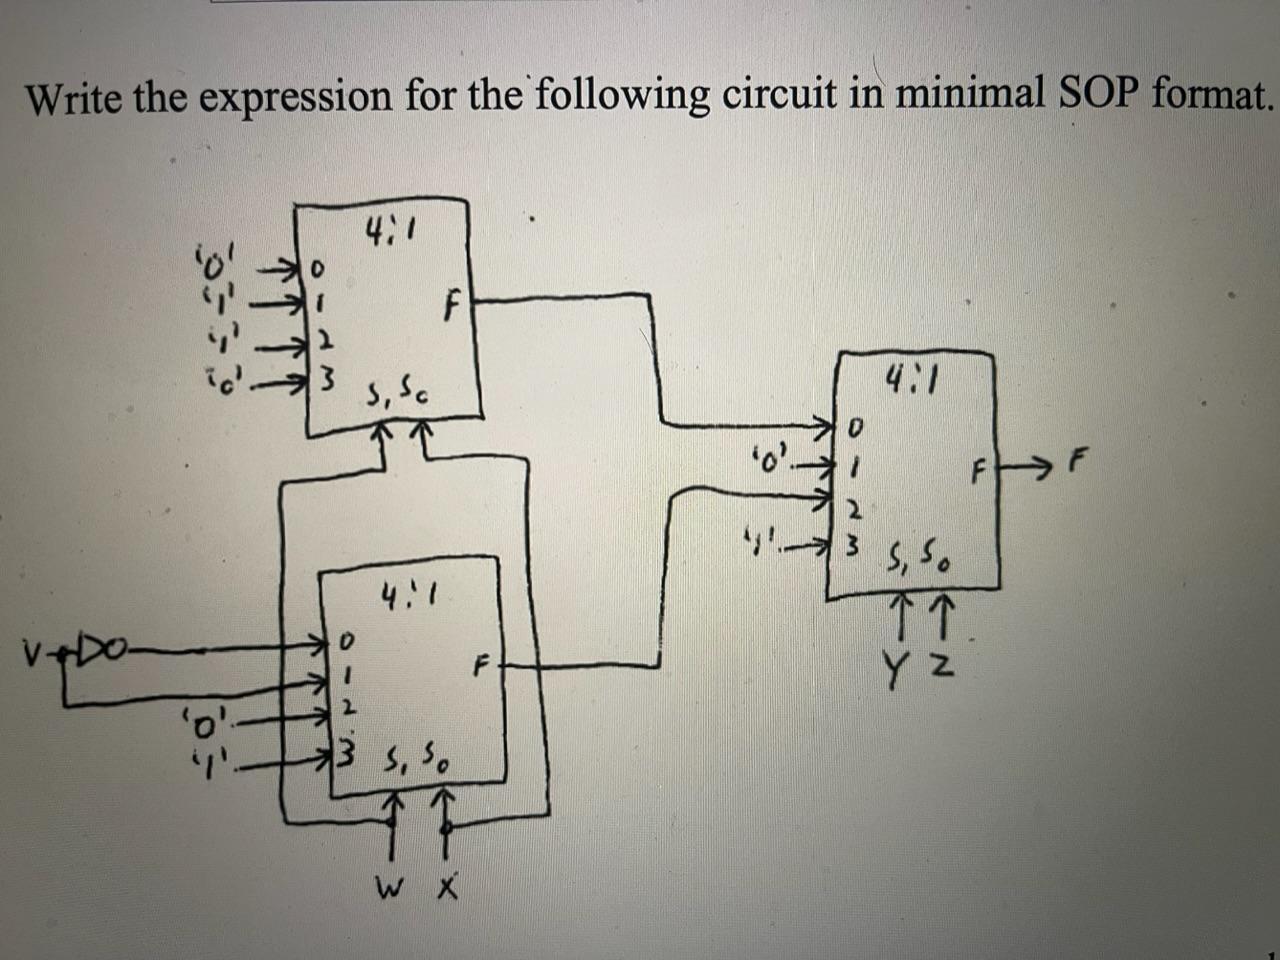 Write the expression for the following circuit in minimal SOP format. 4. TTTT 4:1 3 sisc  1 2 F 40 35.0 wx